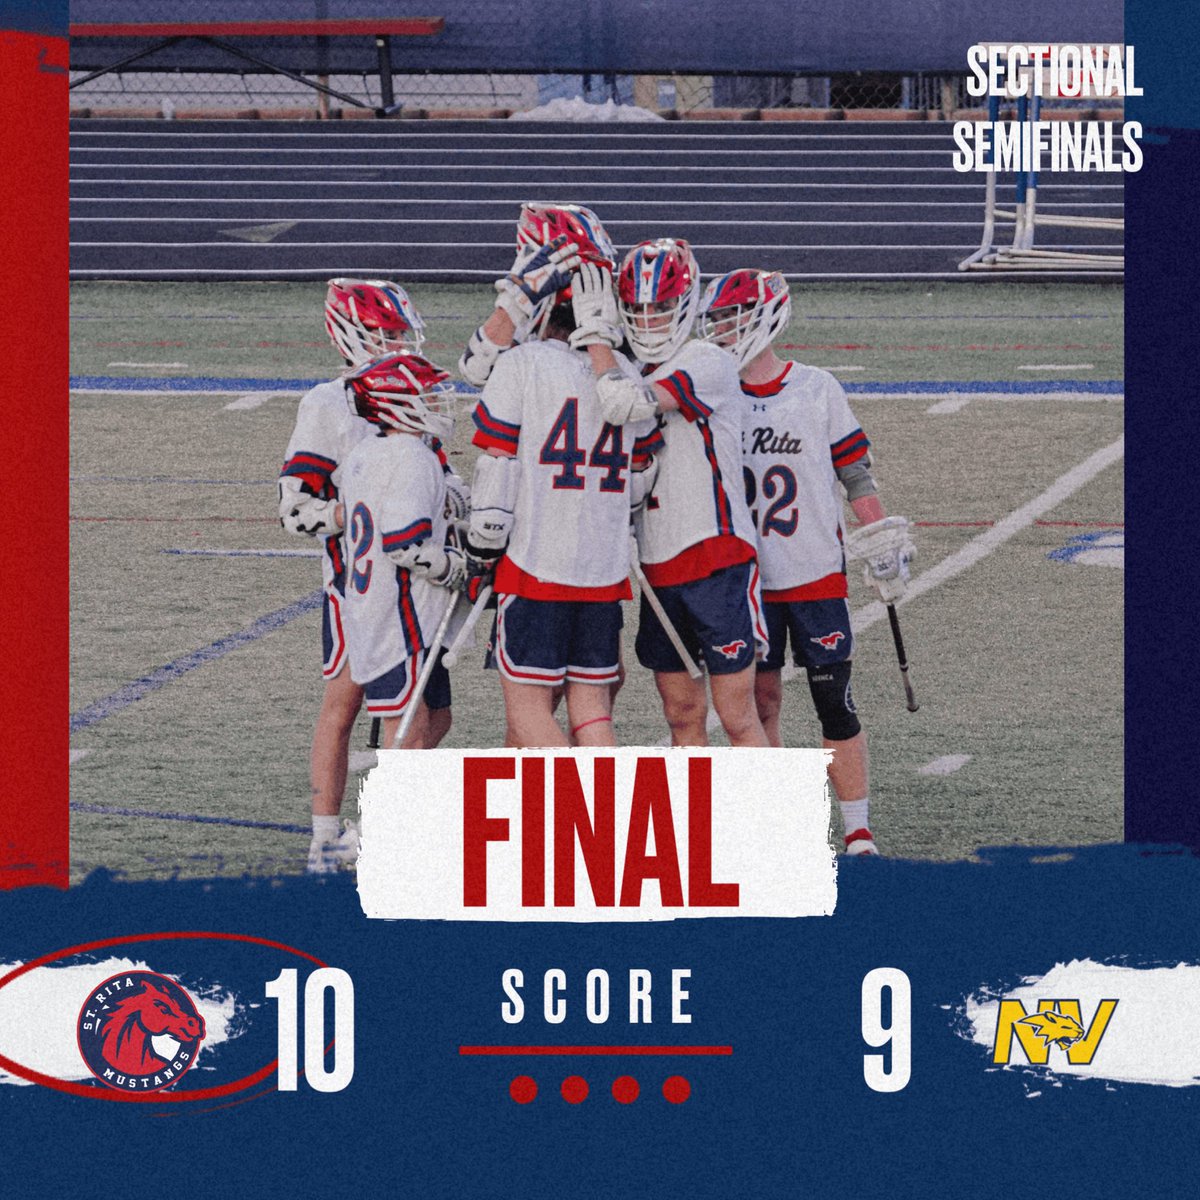 Final. What a comeback for the Mustangs! Down 8-2 going into halftime, the boys rally and out score the Wildcats 8-1 in the second half to win! What a game. Friday we play for the sectional title! #Shootyourshot #Stritalacrosse